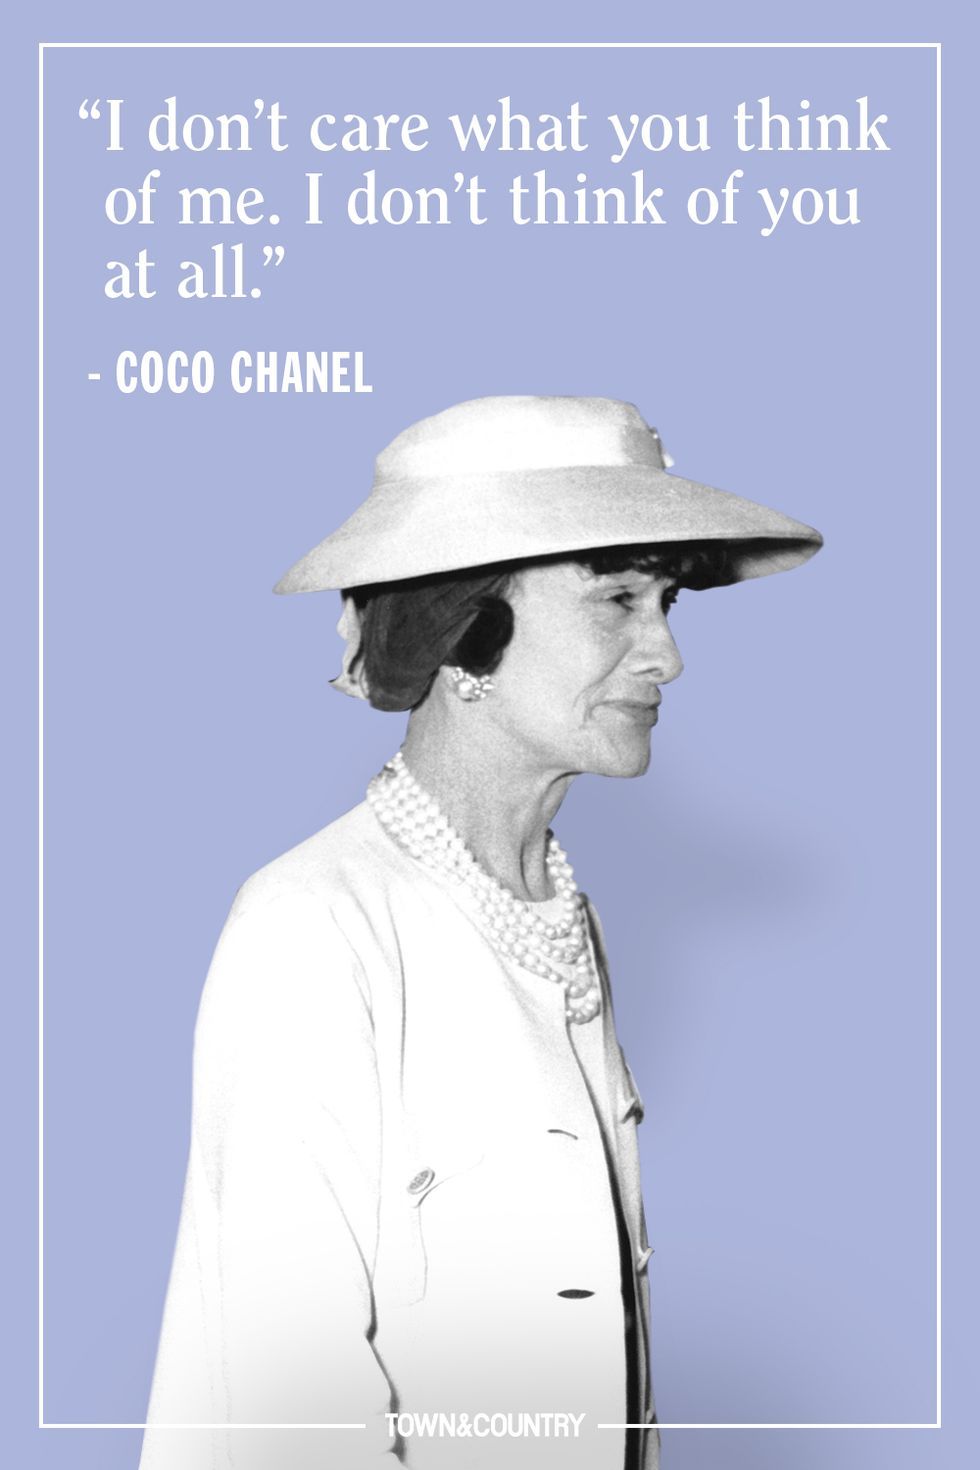 Coco Chanel Quote Pictures Photos and Images for Facebook Tumblr  Pinterest and Twitter